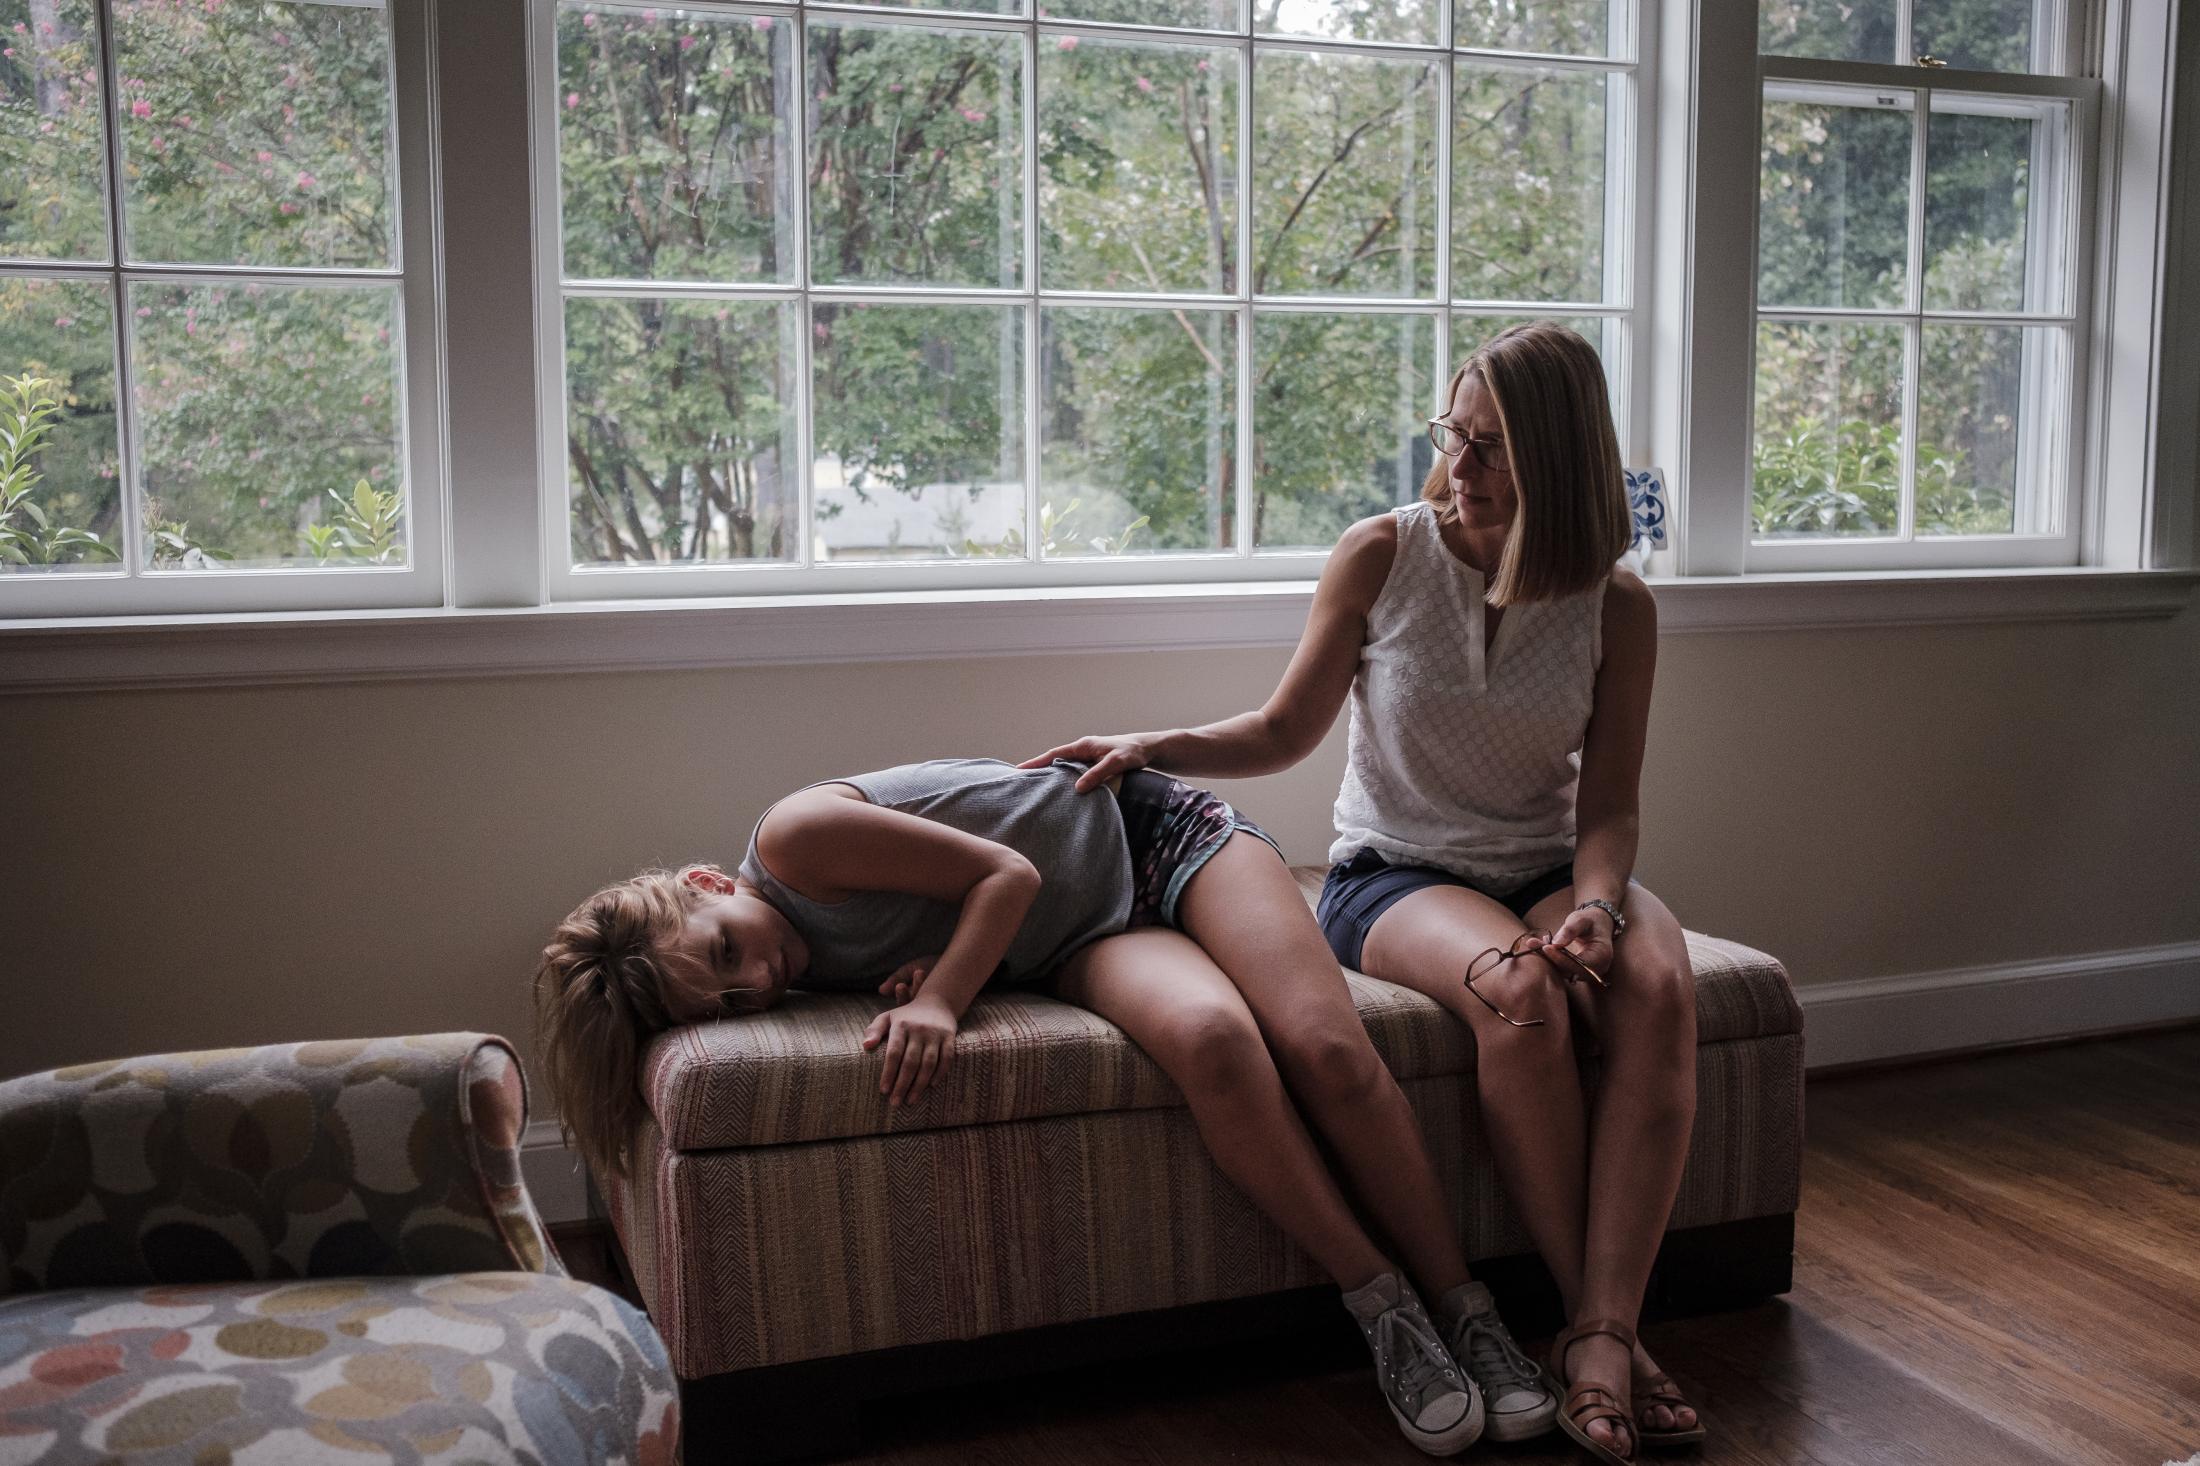 Jeri Seidman and her daughter Hannah lounging at their house in Charlottesville, Virginia, U.S., on Monday Sept. 23, 2019. Hannah is a patient in a genetic risk study about type 1 diabetes at University of Virginia. Photographer: Carlos Bernate/ NPR